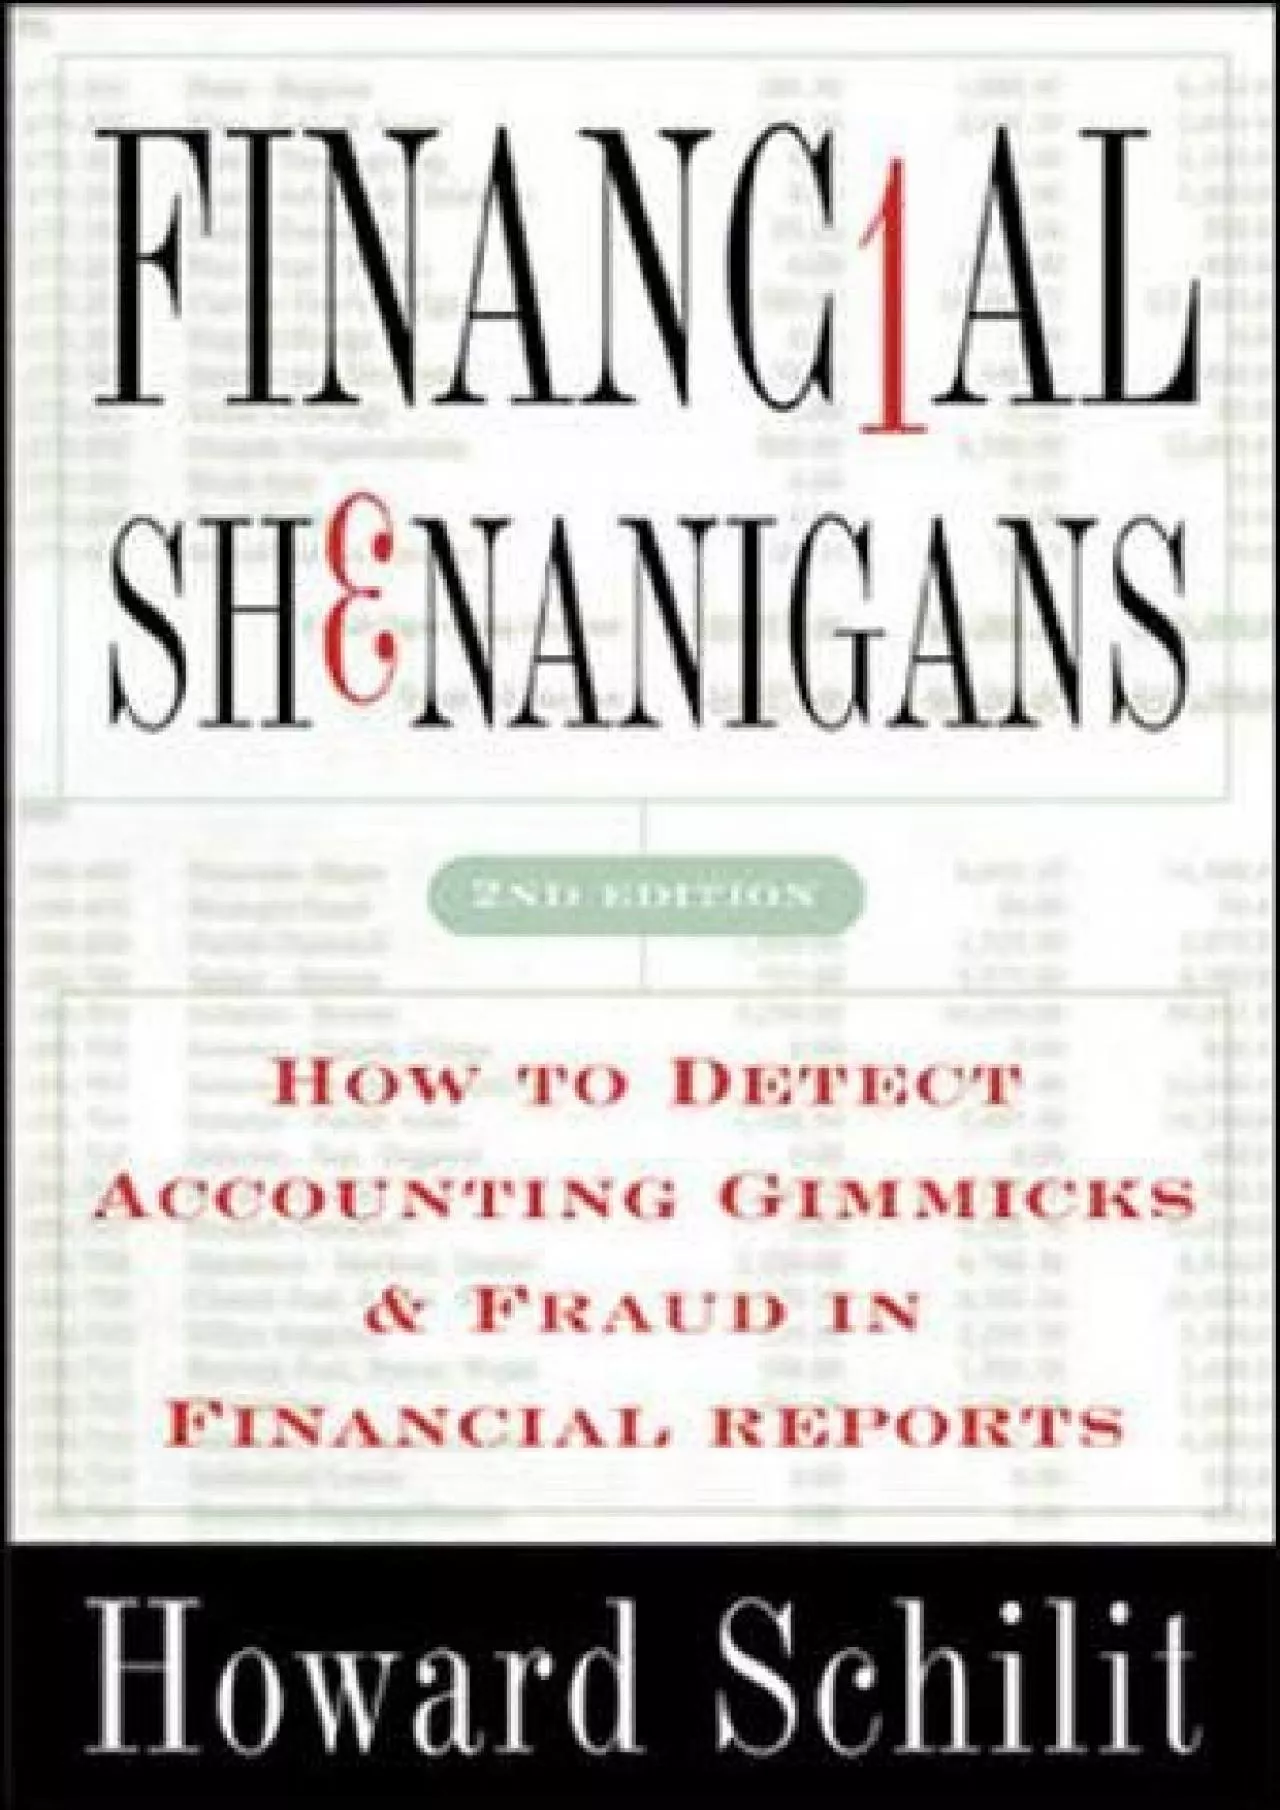 (EBOOK)-Financial Shenanigans: How to Detect Accounting Gimmicks & Fraud in Financial